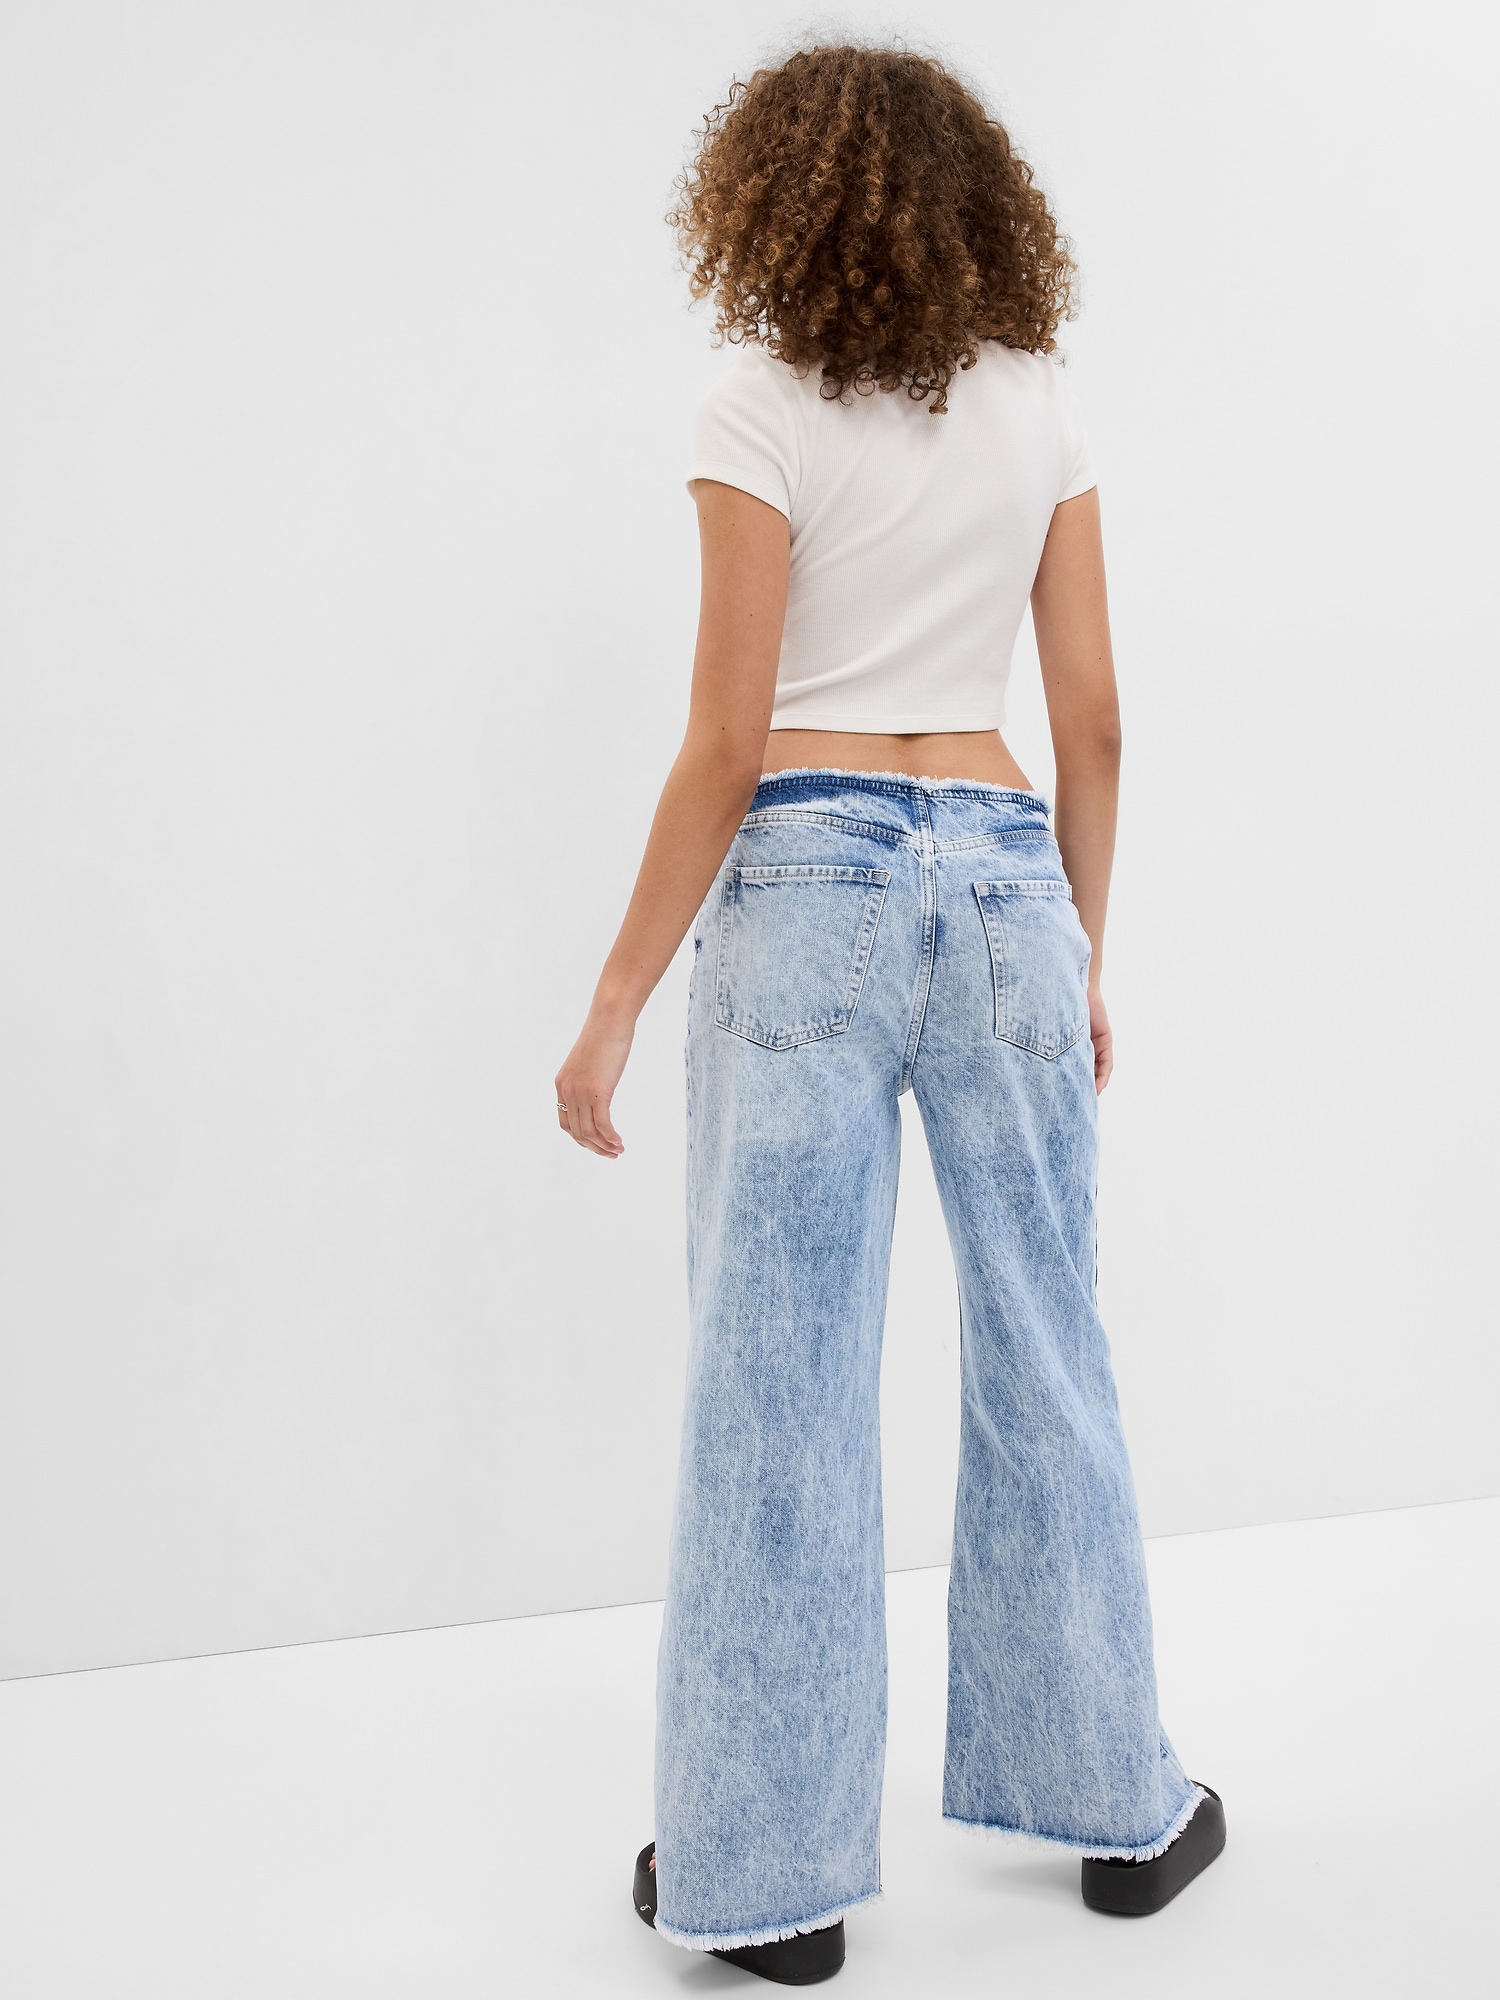 PROJECT GAP Low Rise Wide Baggy Jeans with Washwell | Gap